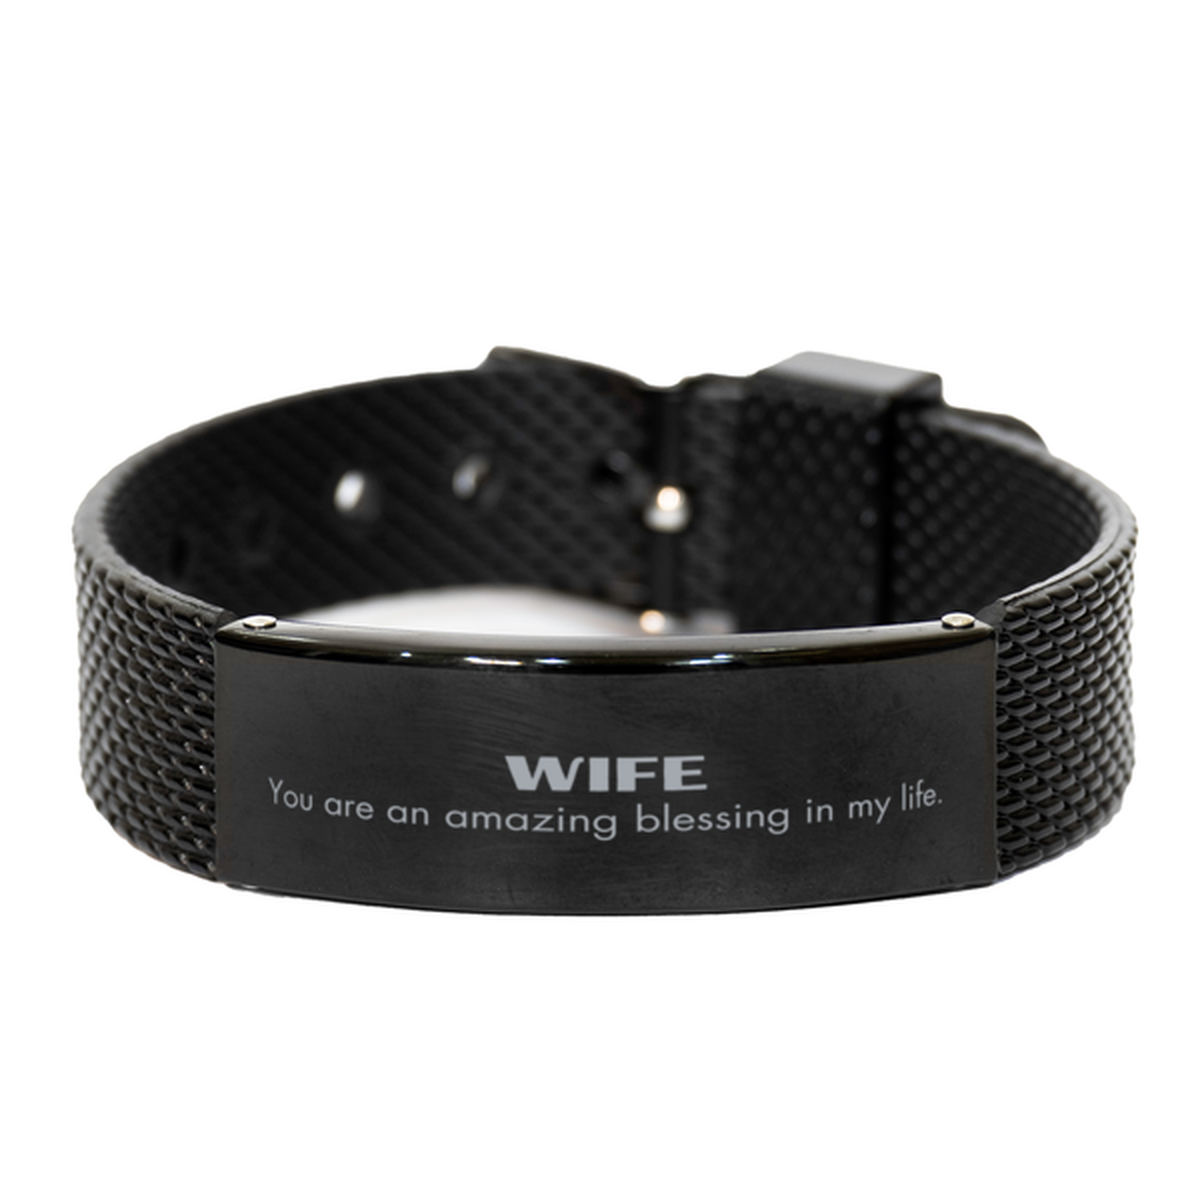 Wife Black Shark Mesh Bracelet, You are an amazing blessing in my life, Thank You Gifts For Wife, Inspirational Birthday Christmas Unique Gifts For Wife